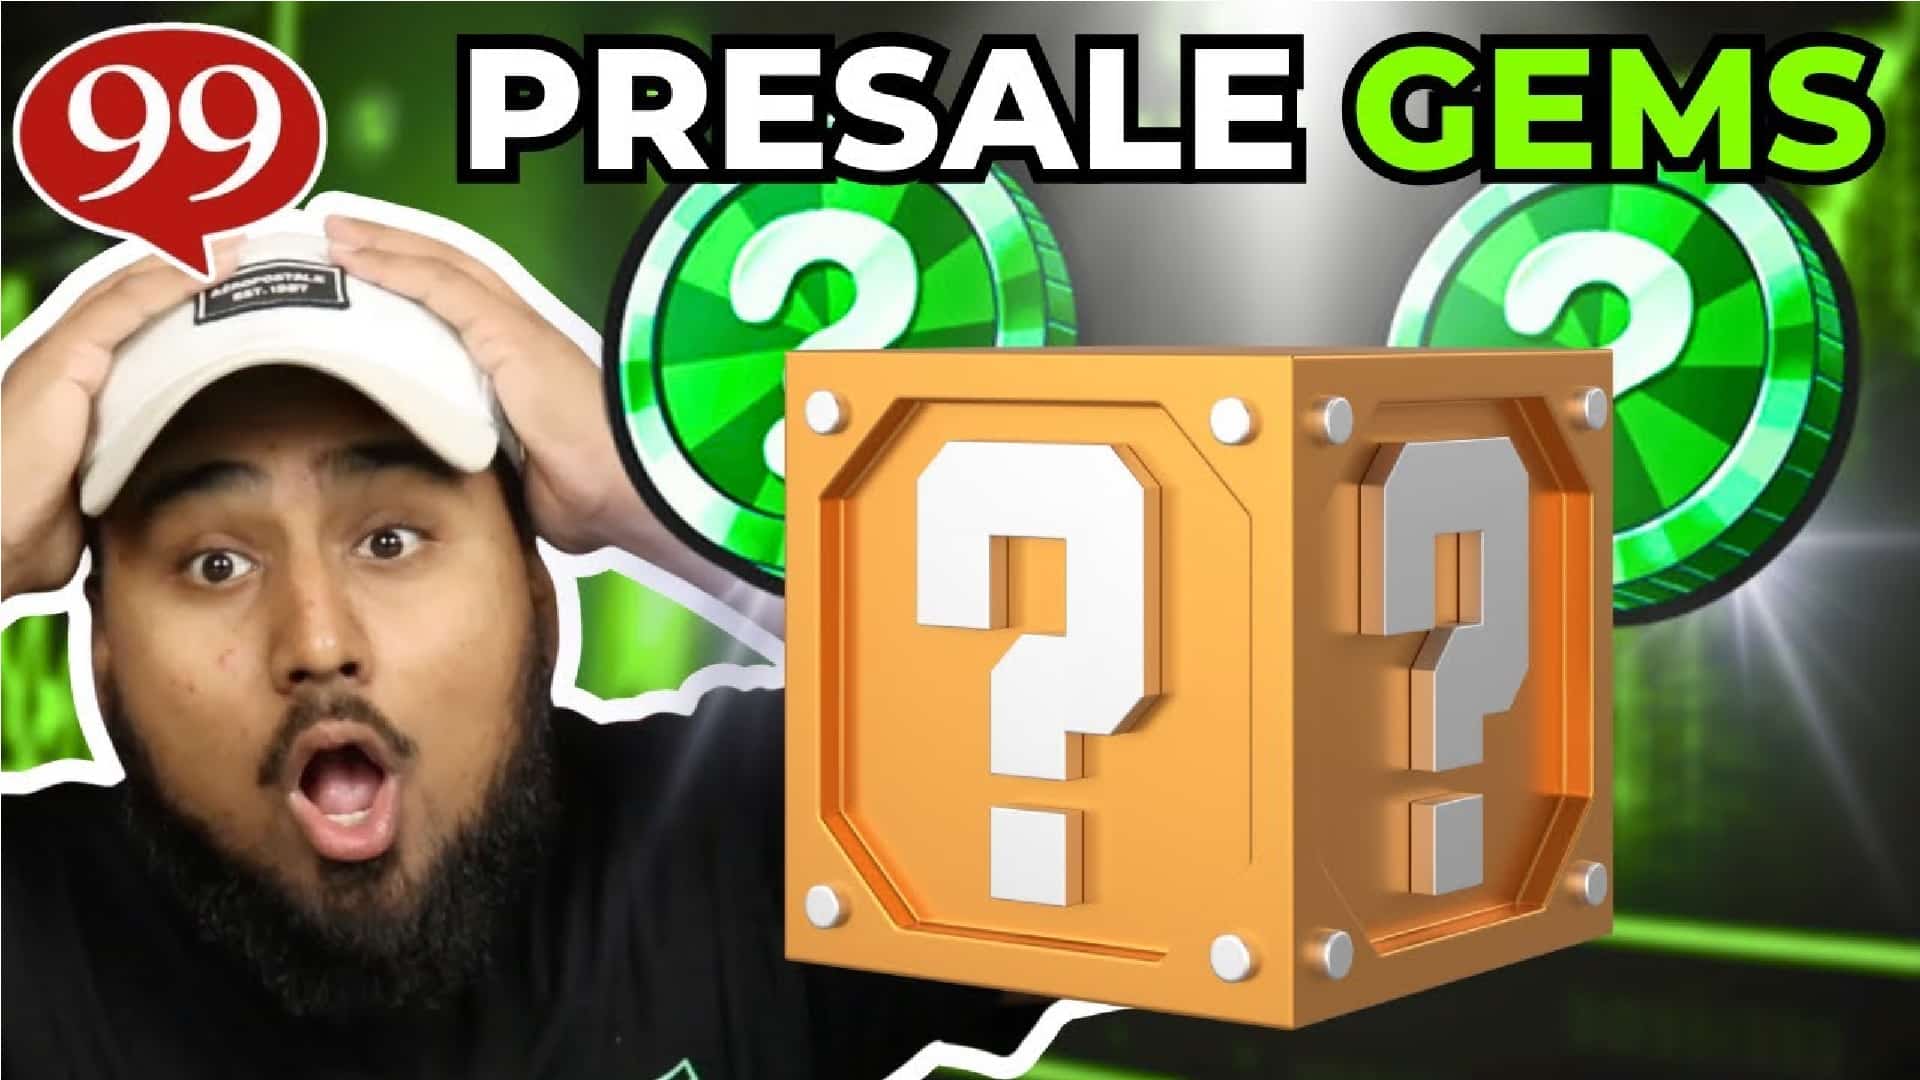 Top 3 Presale Gems with Potential for 50x-100x Gains – $DOGE20, $DOGEVERSE, and $SLOTH